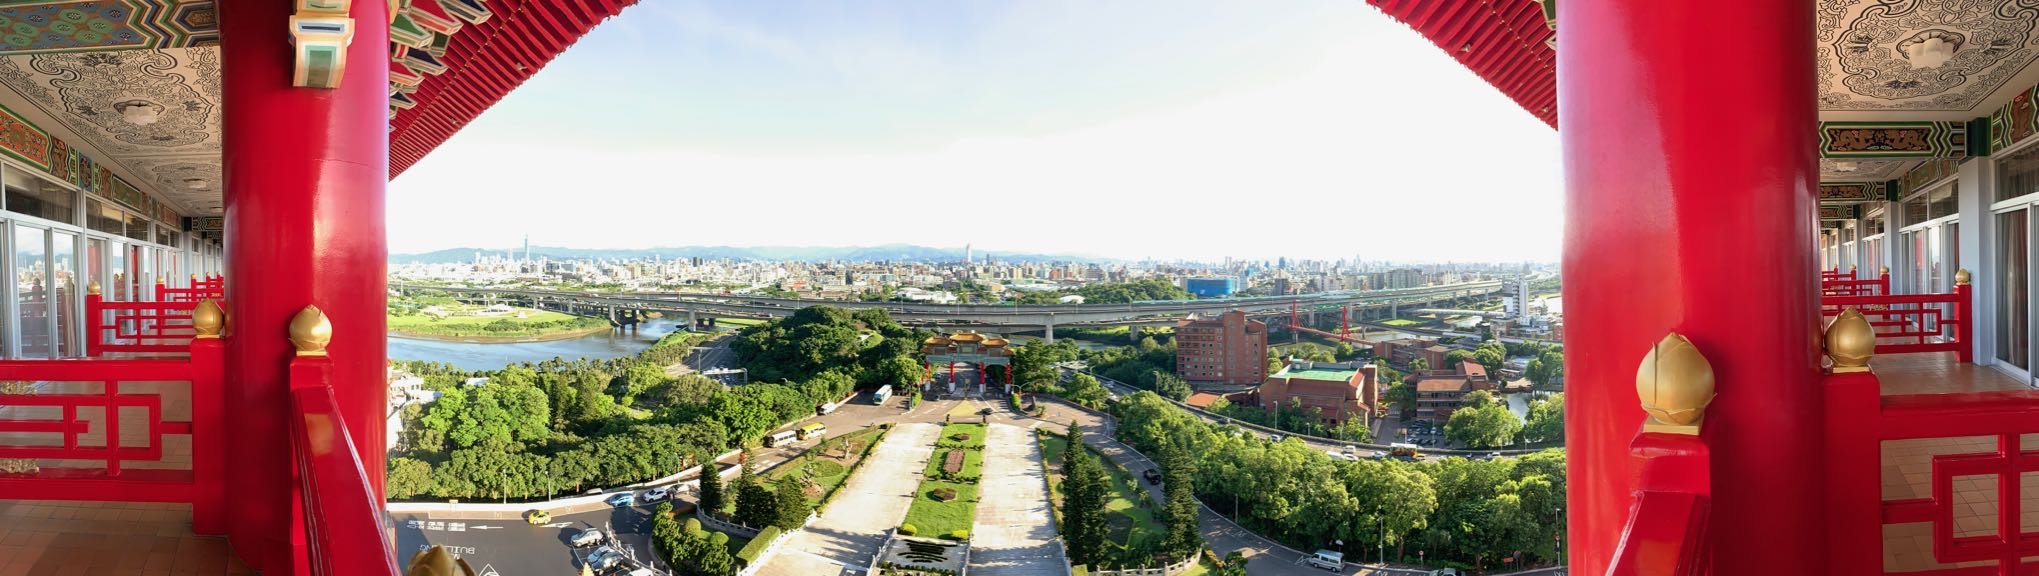 Taipei from the grand hotel